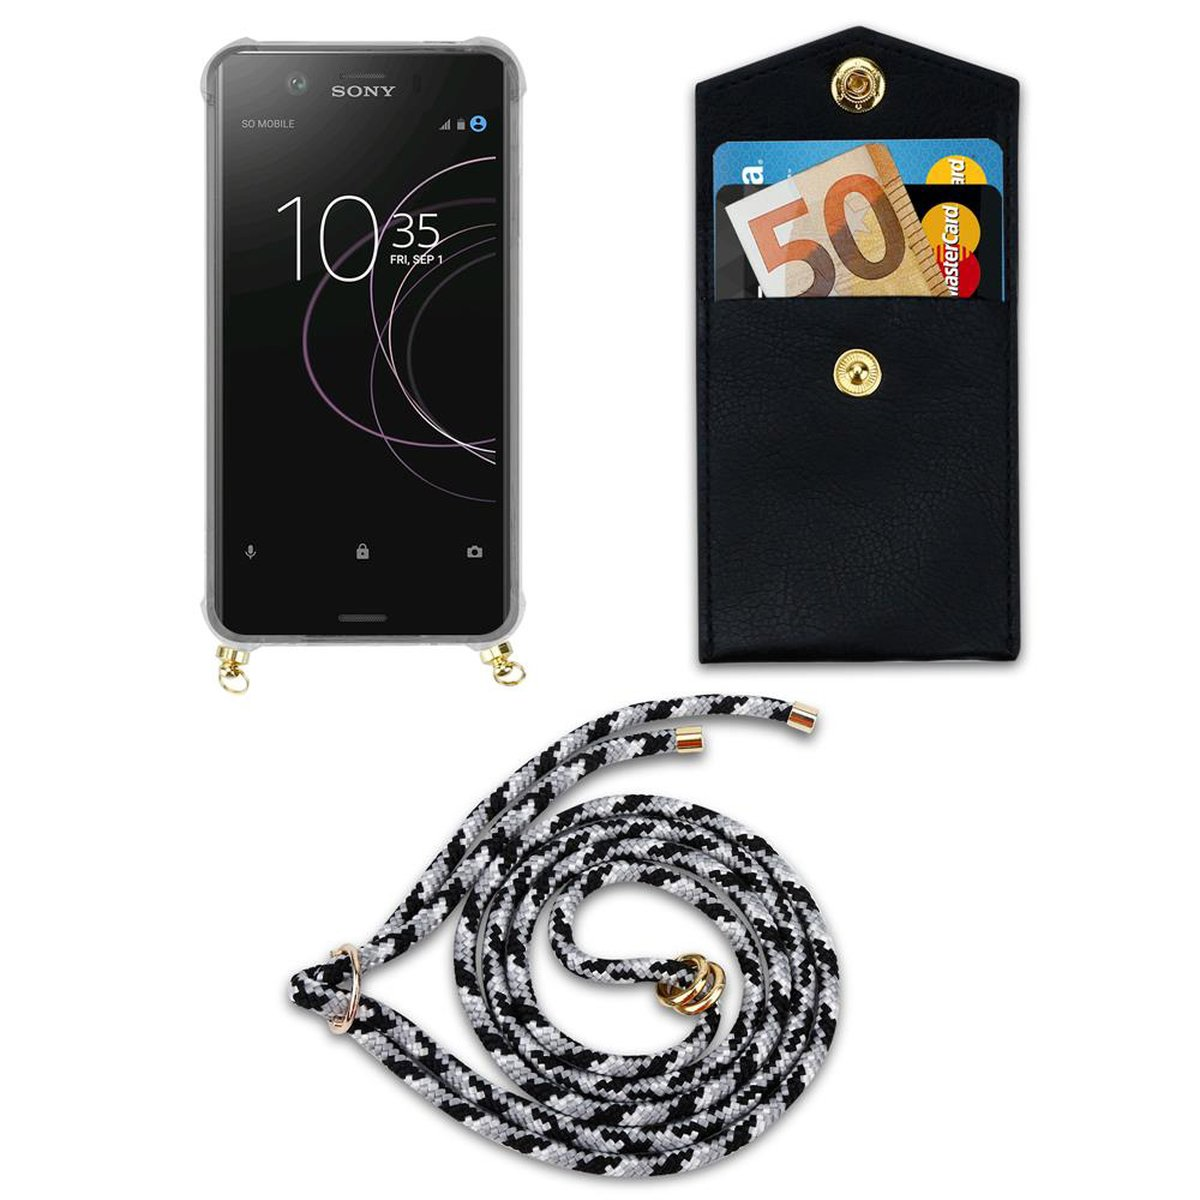 CADORABO Handy Kette mit Gold Kordel COMPACT, Sony, Hülle, und Band Ringen, Xperia XZ1 SCHWARZ CAMOUFLAGE Backcover, abnehmbarer